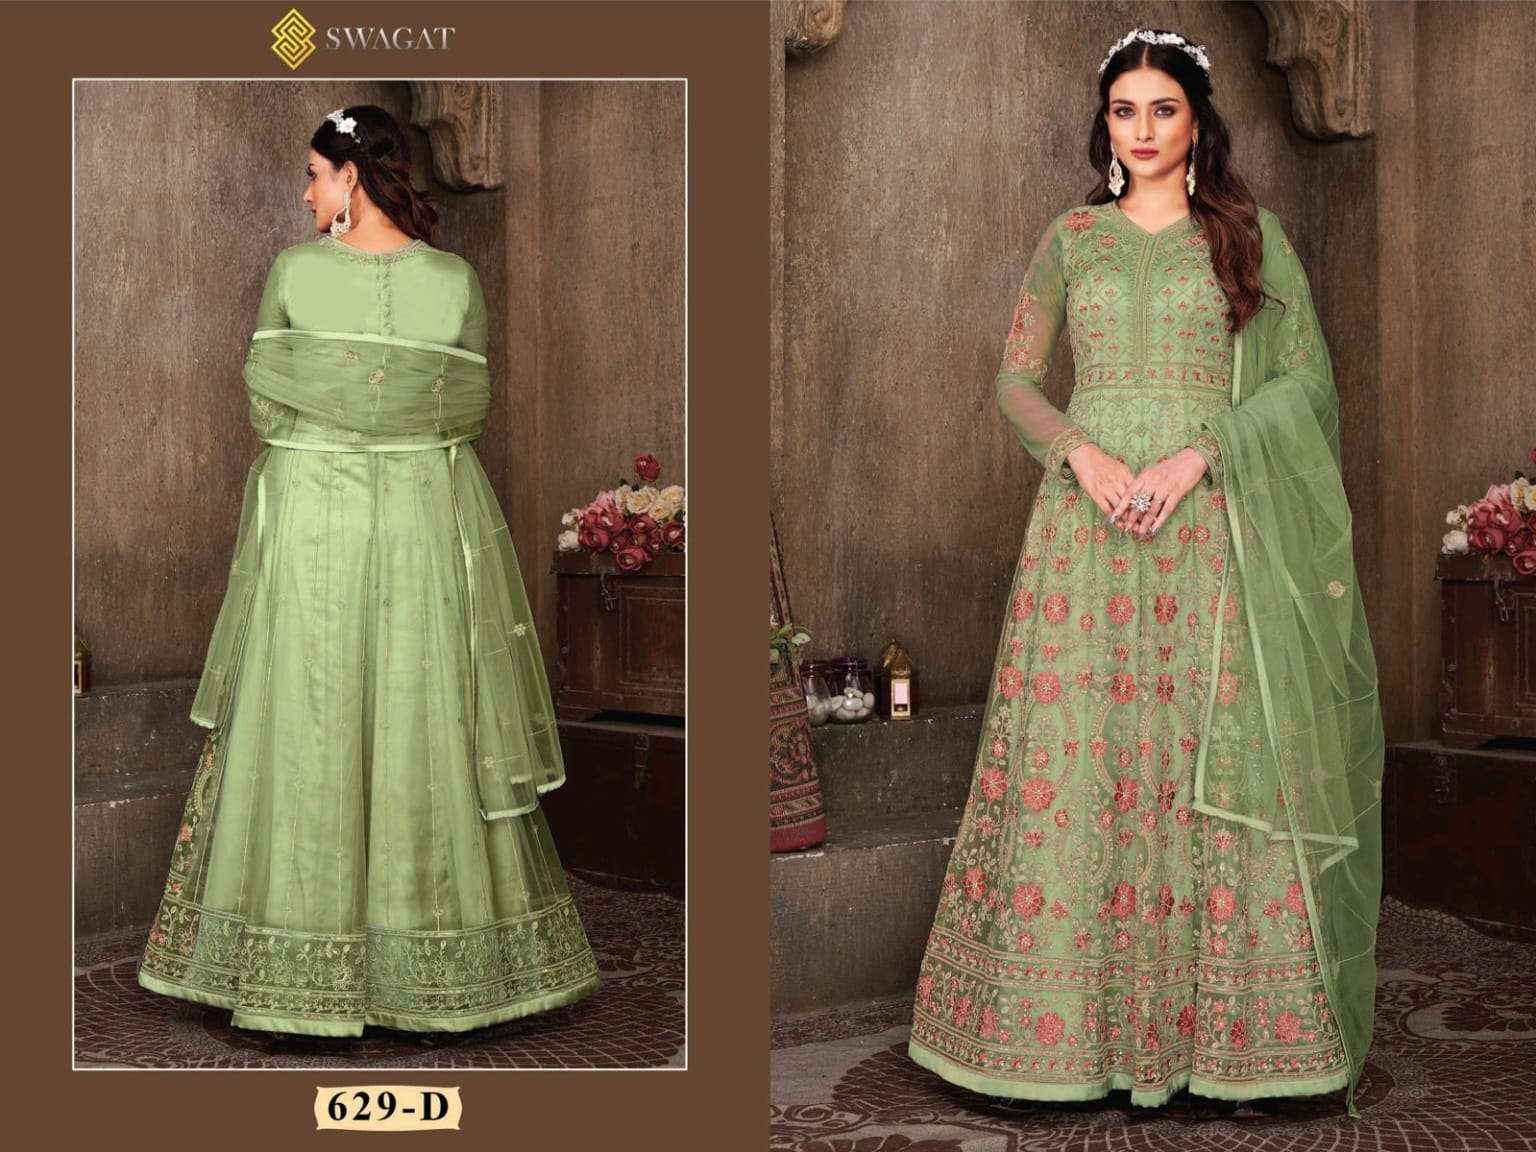 Swagat 629 Colours By Swagat 629-A To 629-D Series Beautiful Stylish Anarkali Suits Fancy Colorful Casual Wear & Ethnic Wear & Ready To Wear Net Dresses At Wholesale Price